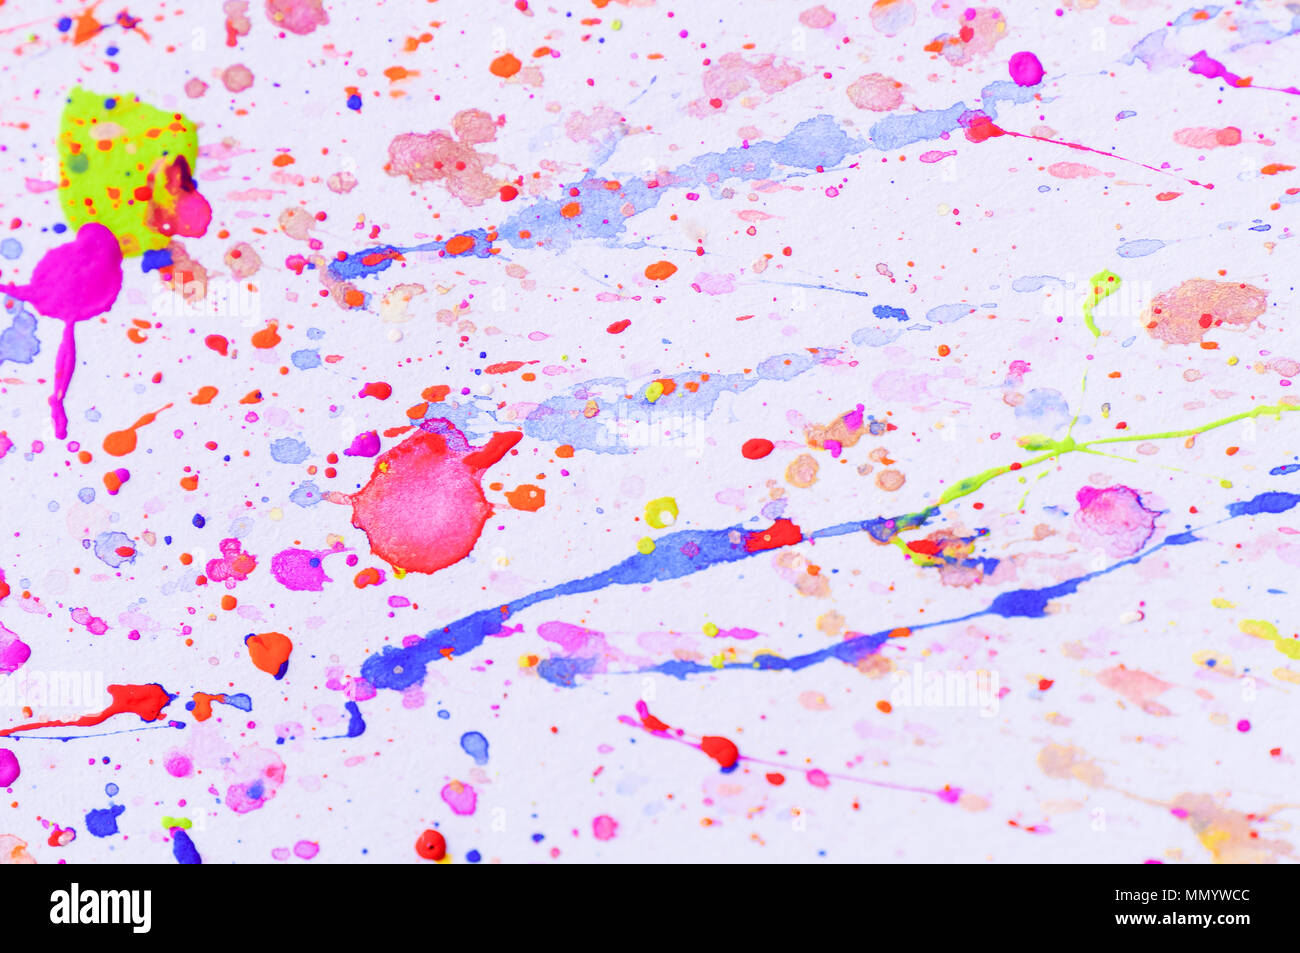 splash of watercolorin many color, pink, yellow, blue, purple and blue- concept in abstract paint paper background for artwork Stock Photo